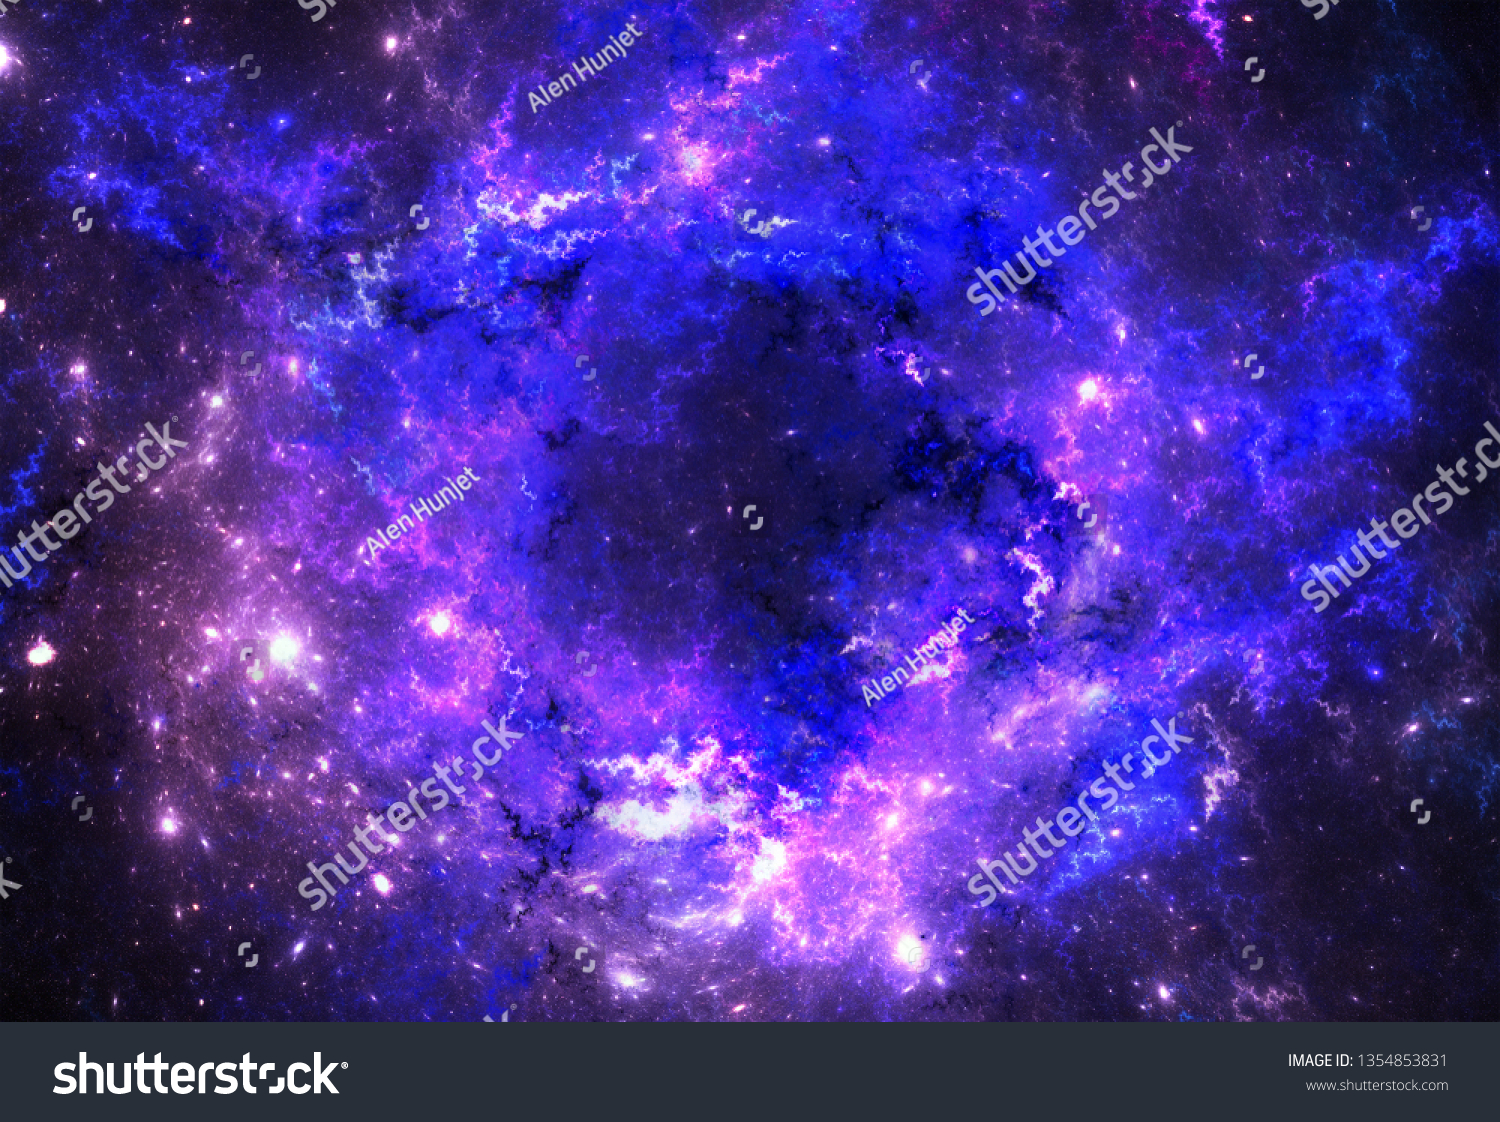 Illustration of a space and starfield on a dark background. #1354853831